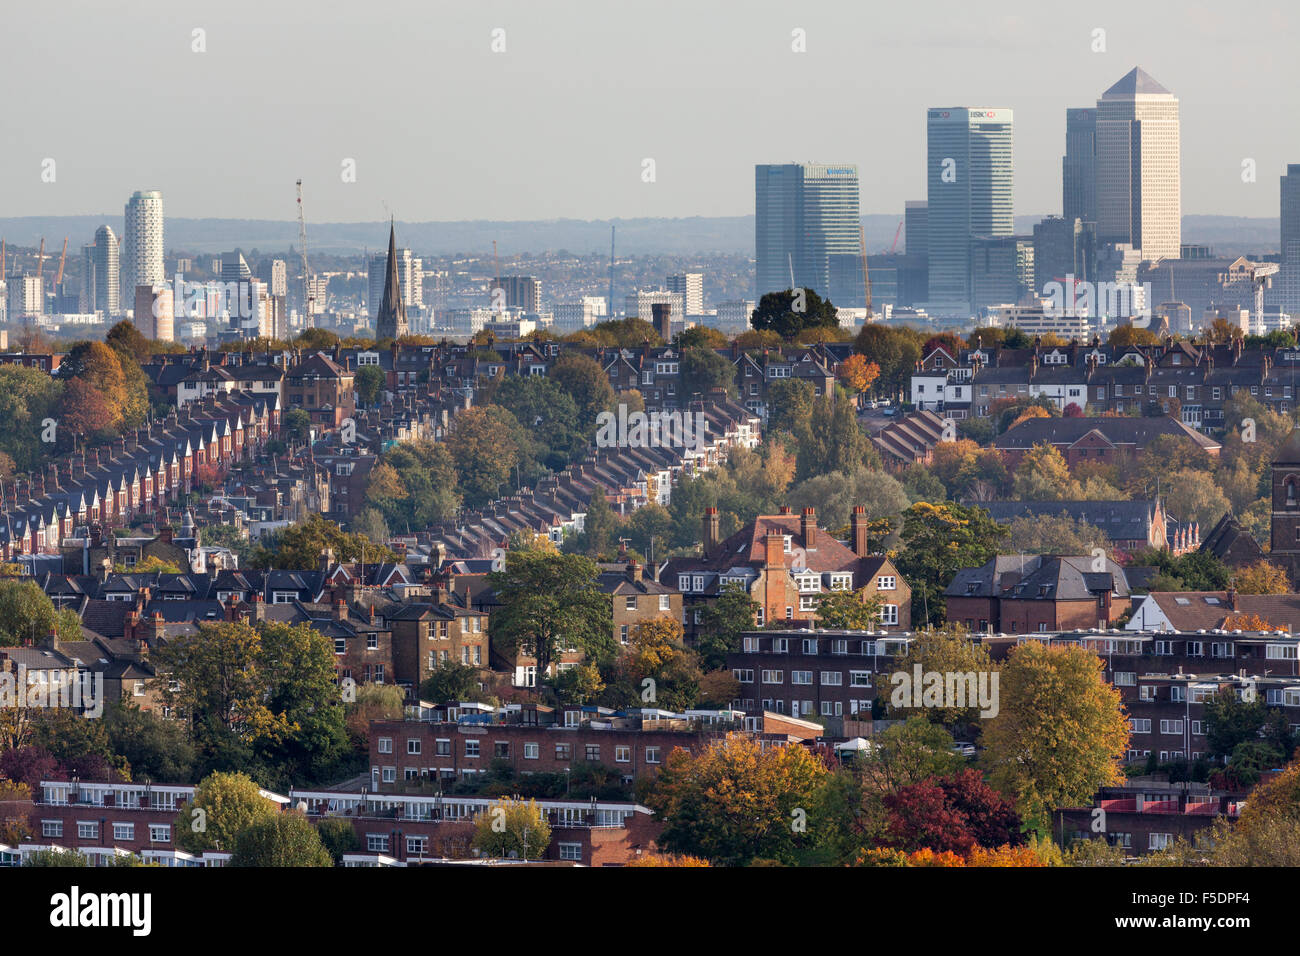 View over the London districts of Hornsey and Crouch End towards the tall buildings of Bow,Poplar and Canary Wharf, Docklands. Stock Photo